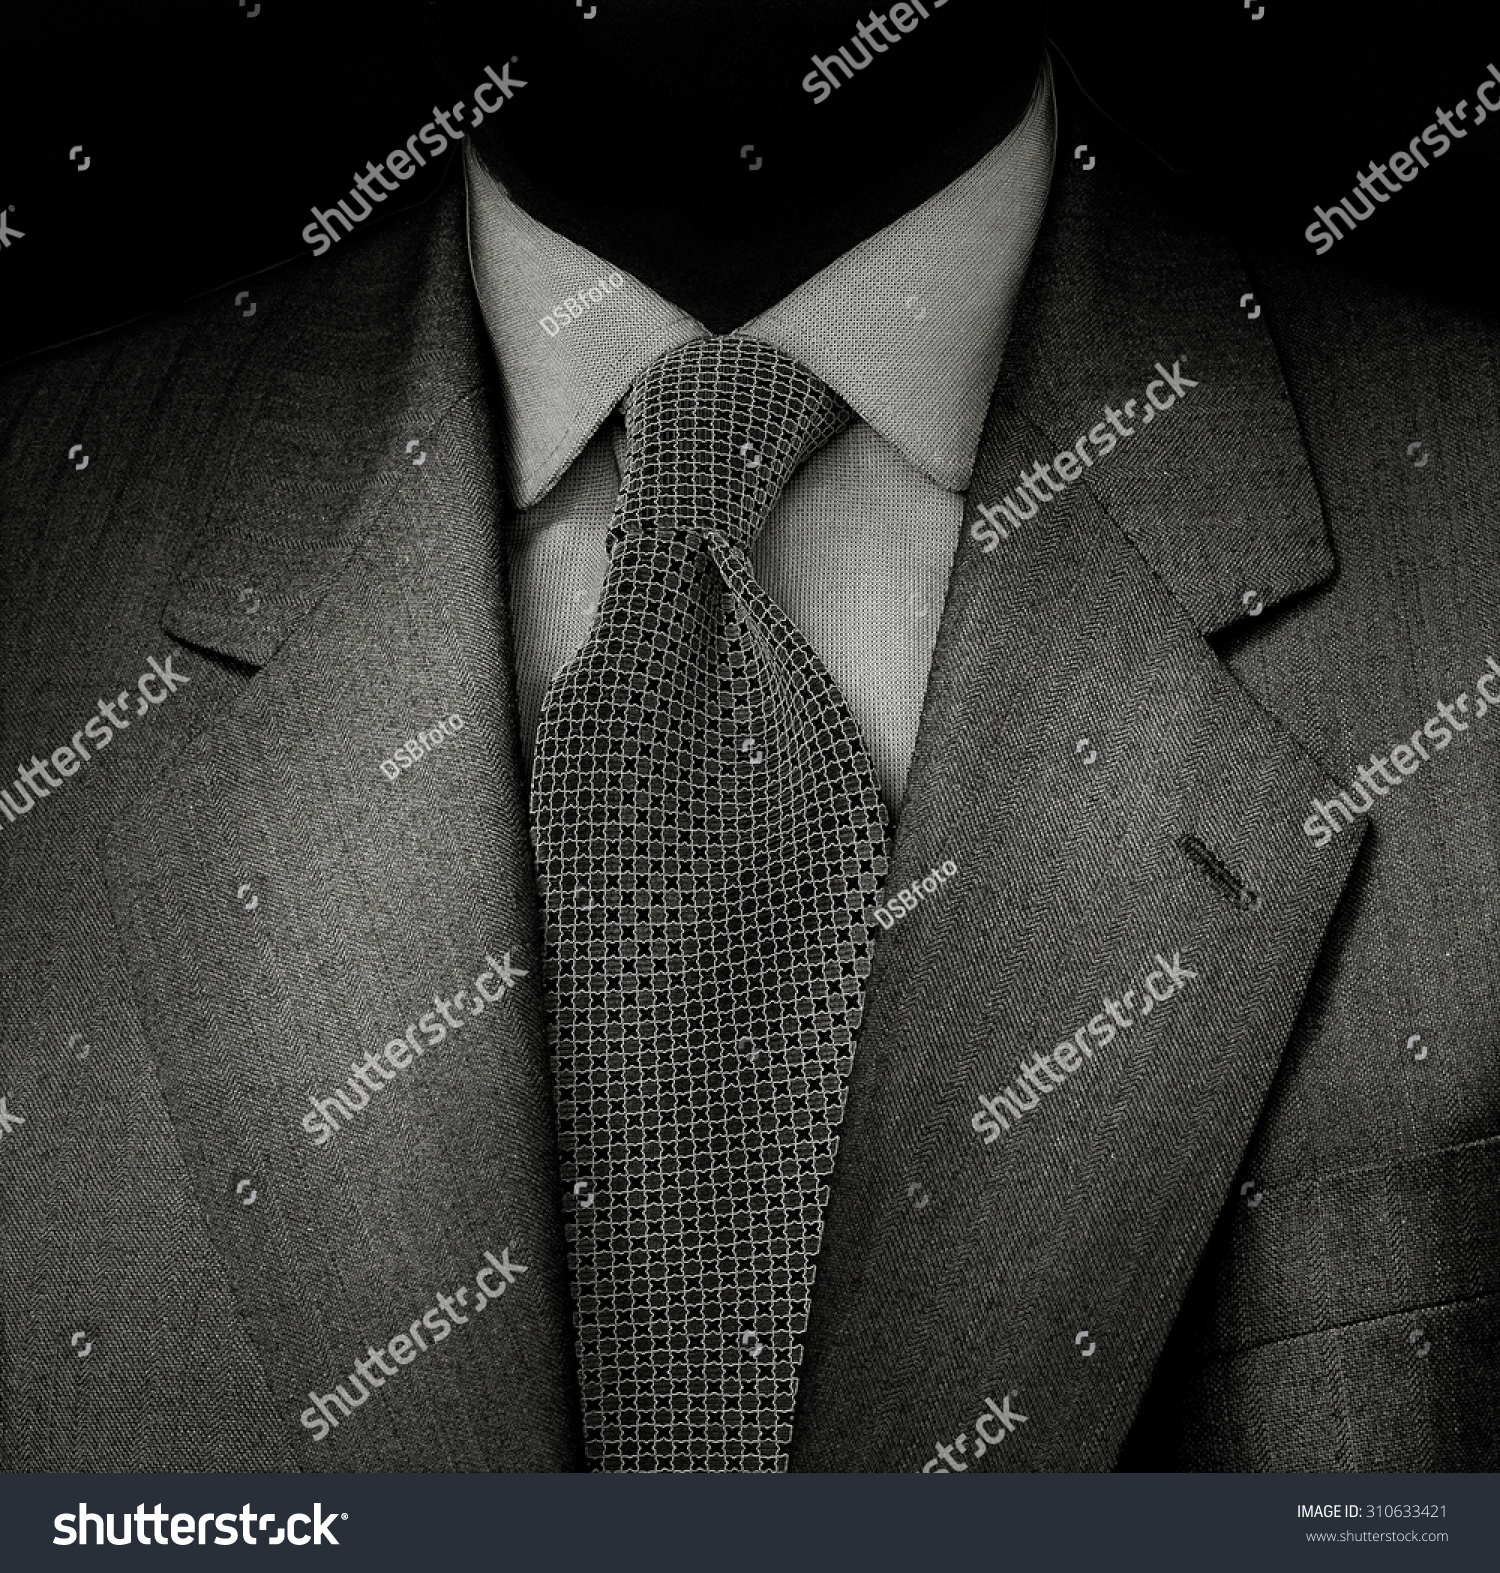 651 Black and white photography man in dress shirt Images, Stock Photos ...